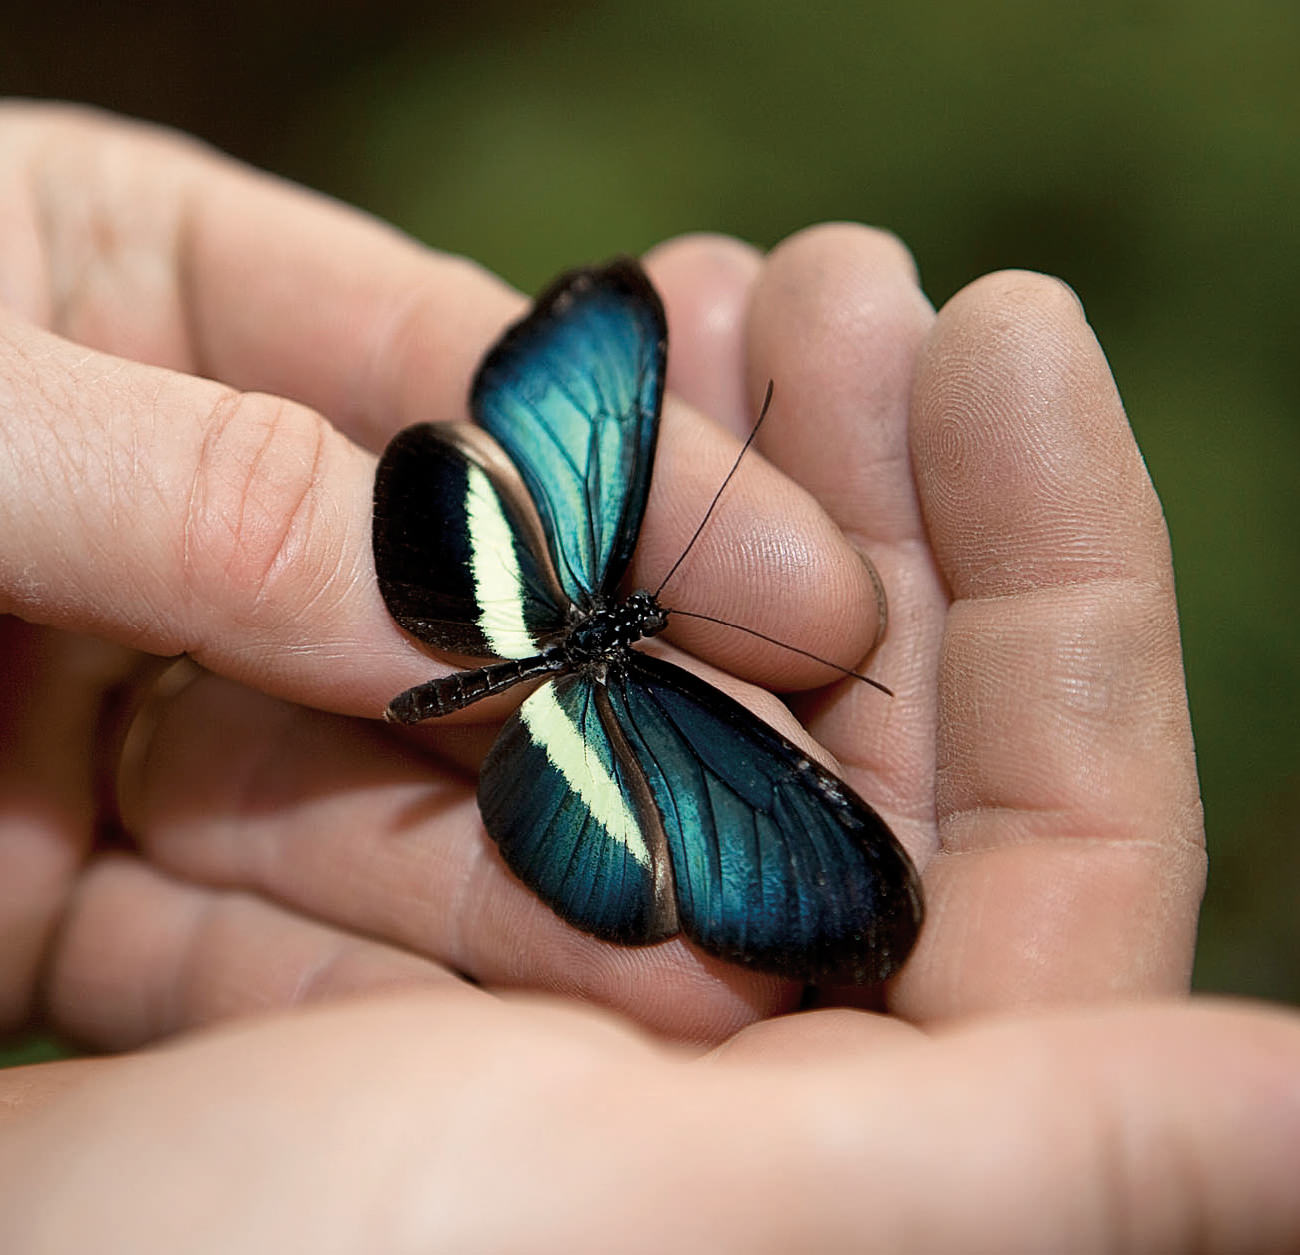 NUVO Magazine: Butterfly World Project